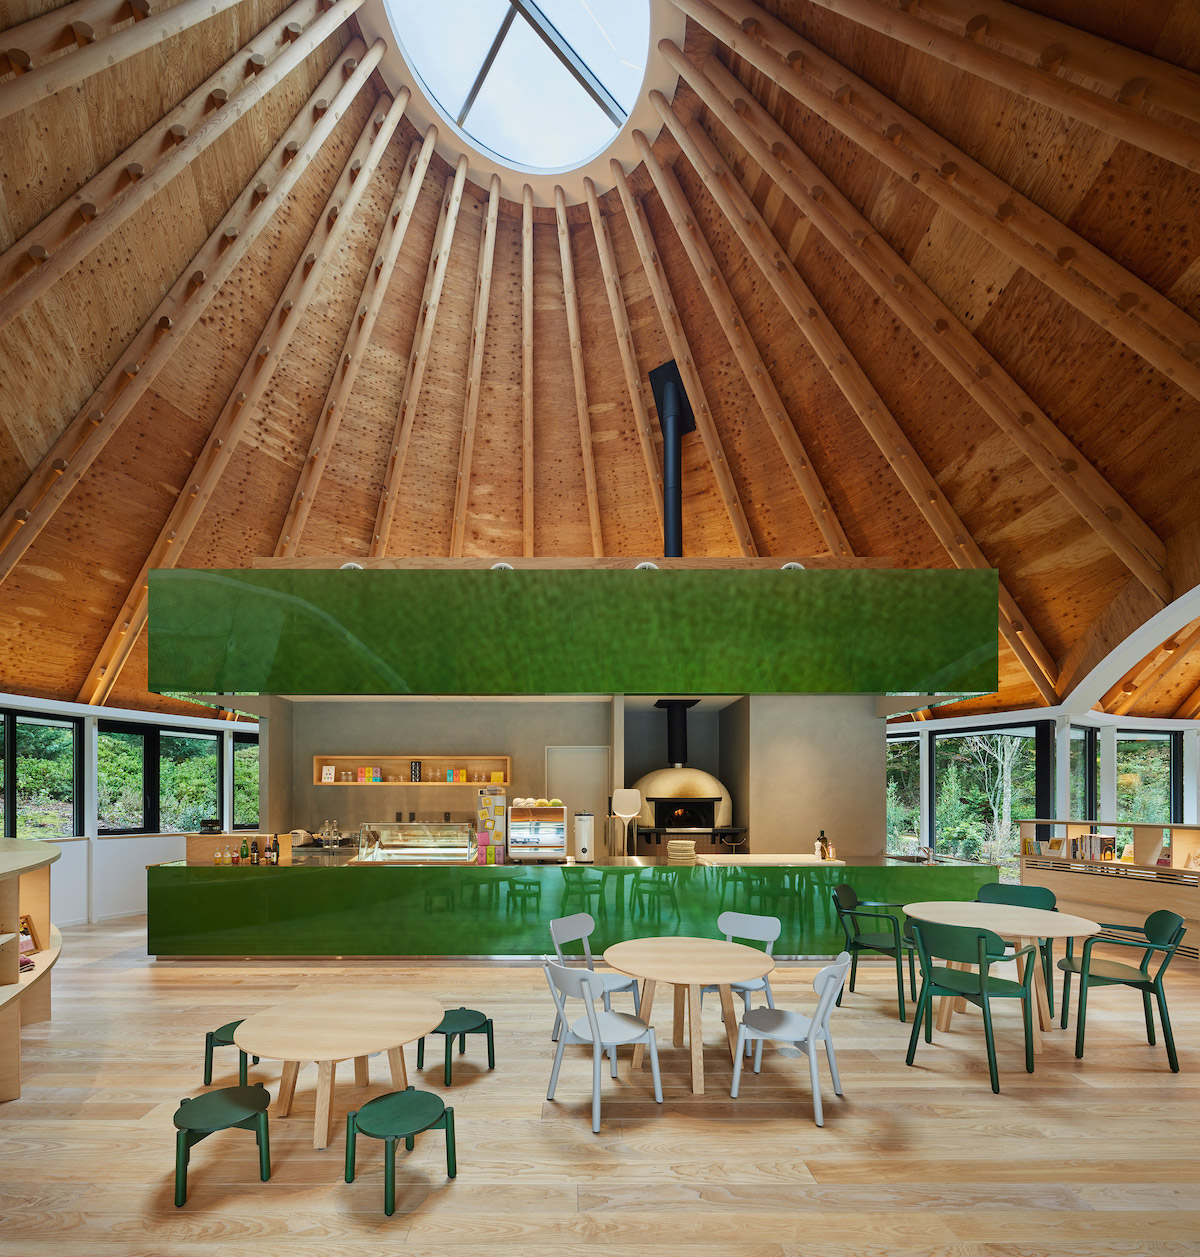 The PokoPoko Clubhouse is a “Fairytale” Hotel Near These Japanese Mountains